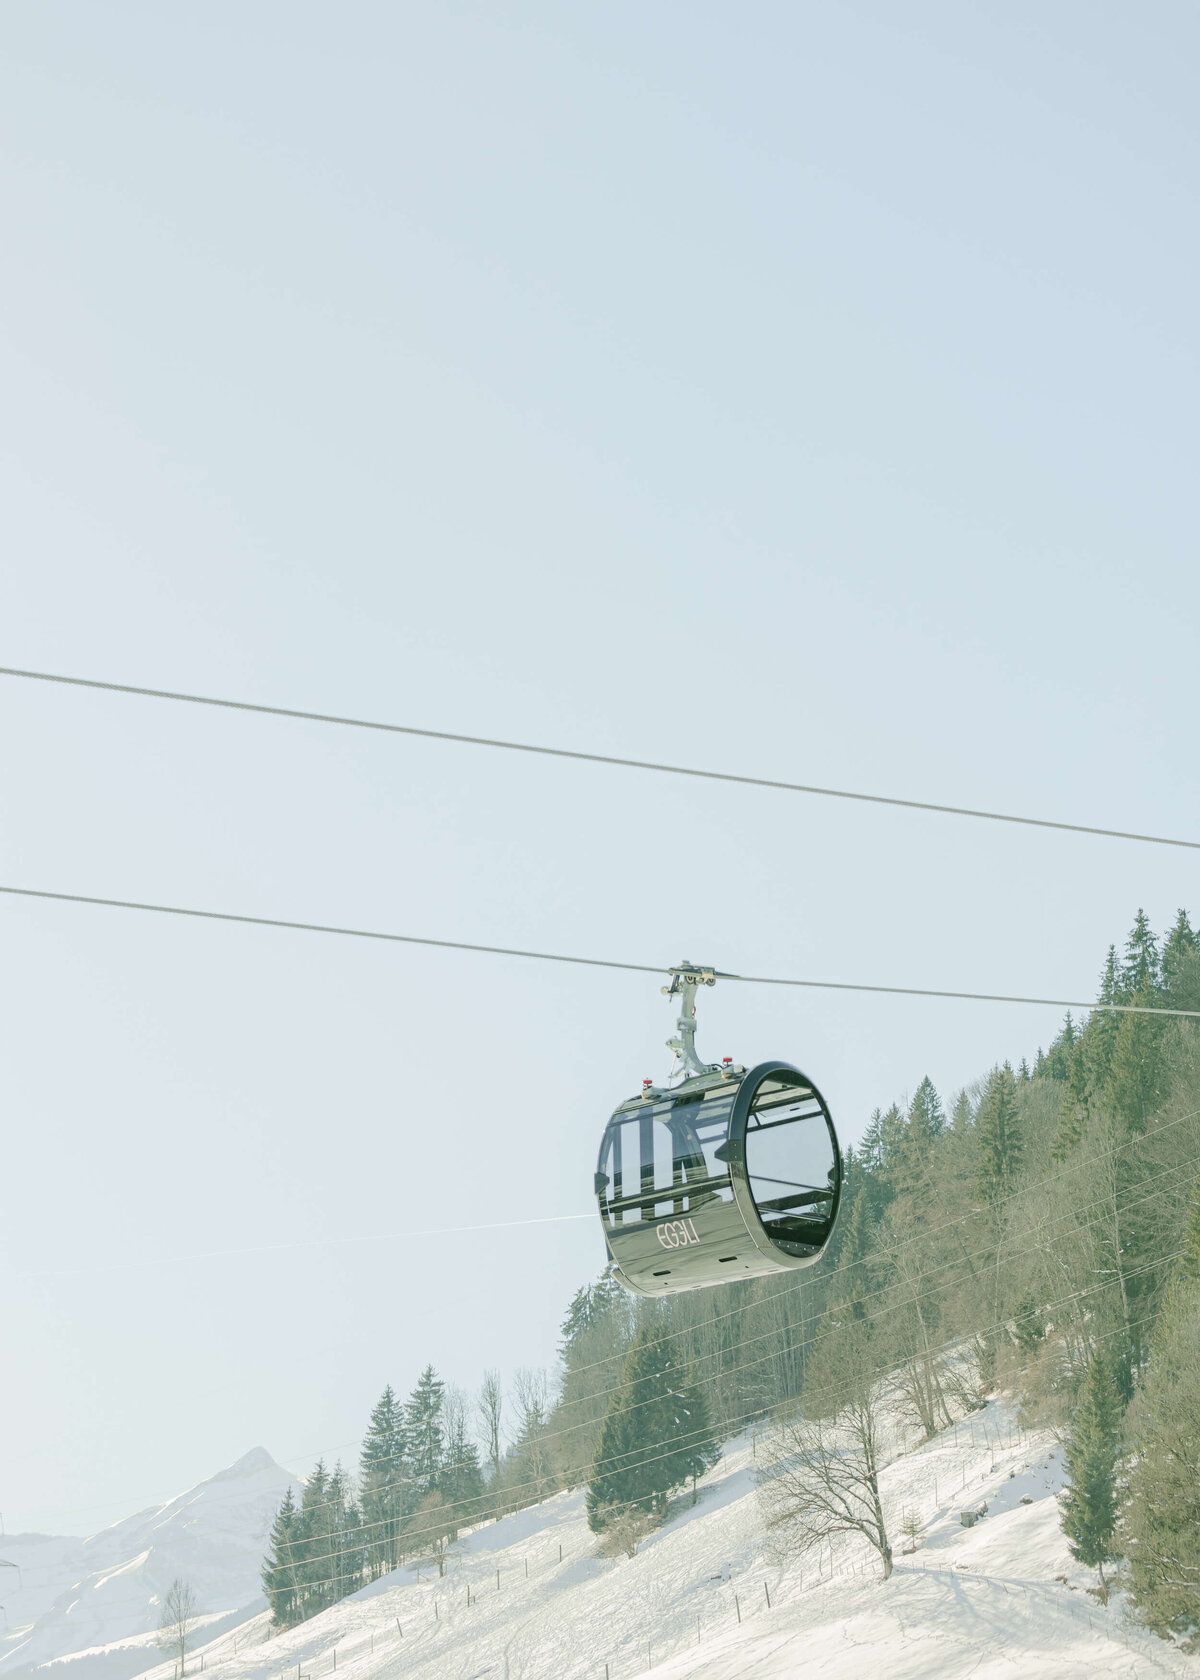 chloe-winstanley-events-gstaad-eggli-chairlift